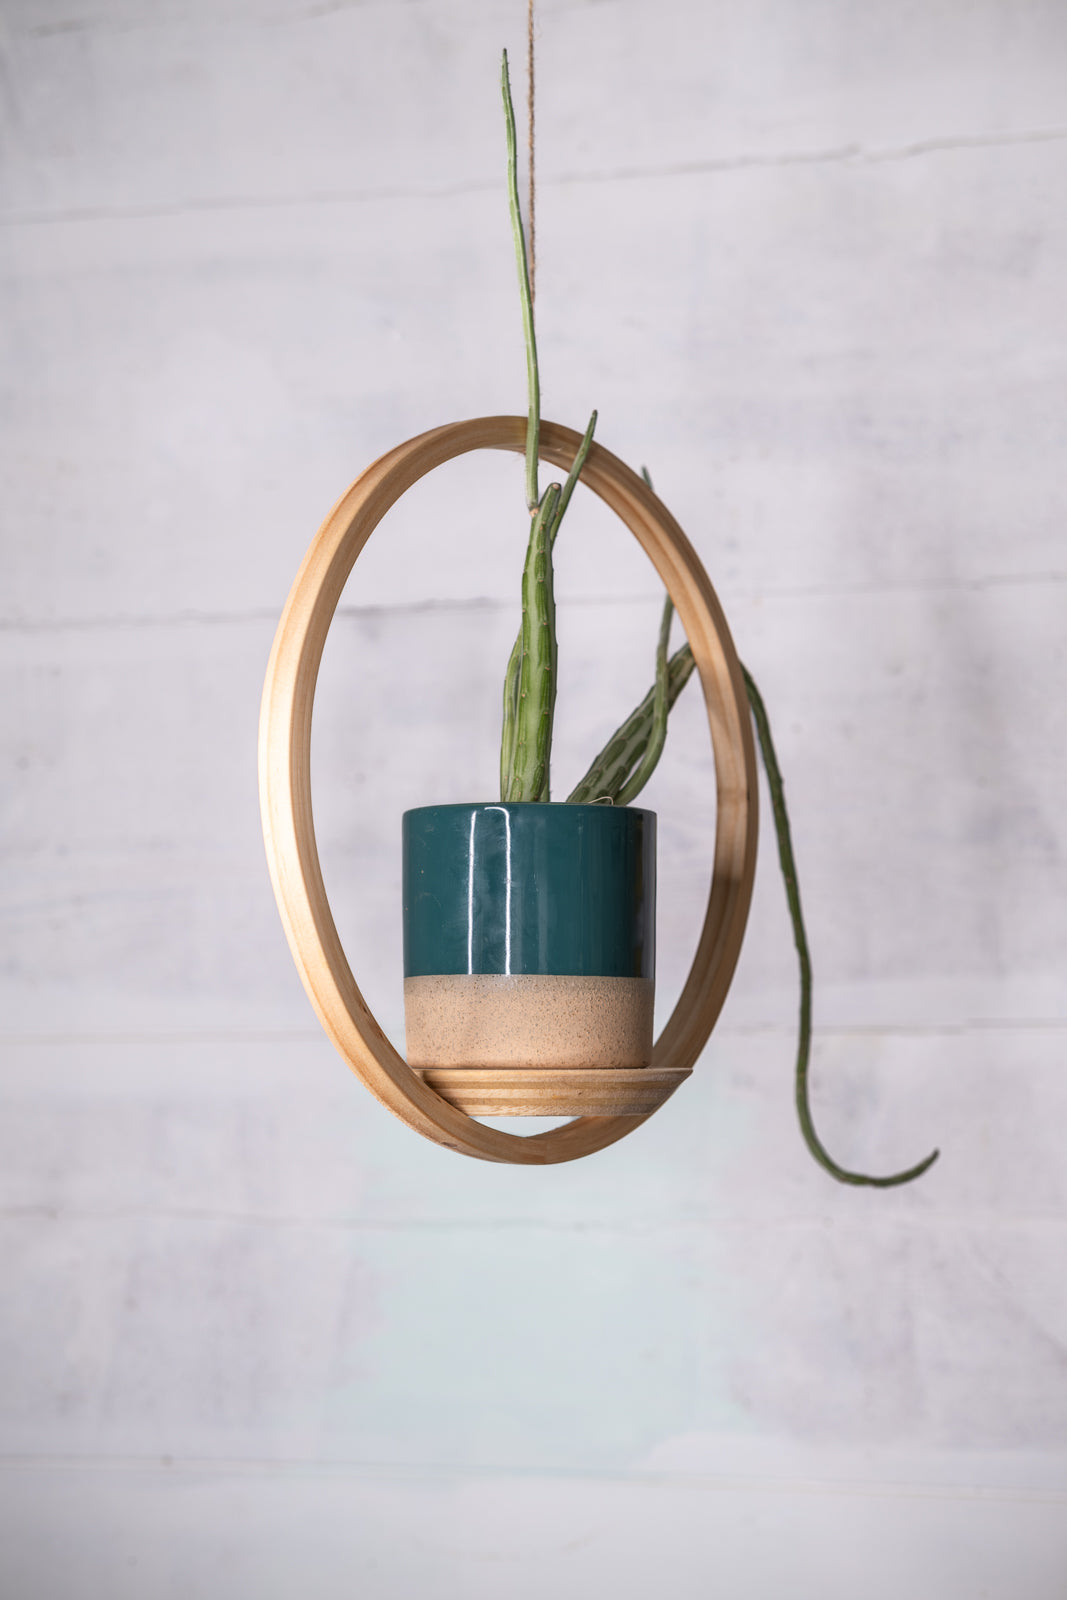 Small Circle Wooden Plant Hanger, Bubble Hanger, Planter With Saucer, Air Plant Hanger, Boho, Mid Century Modern Planter